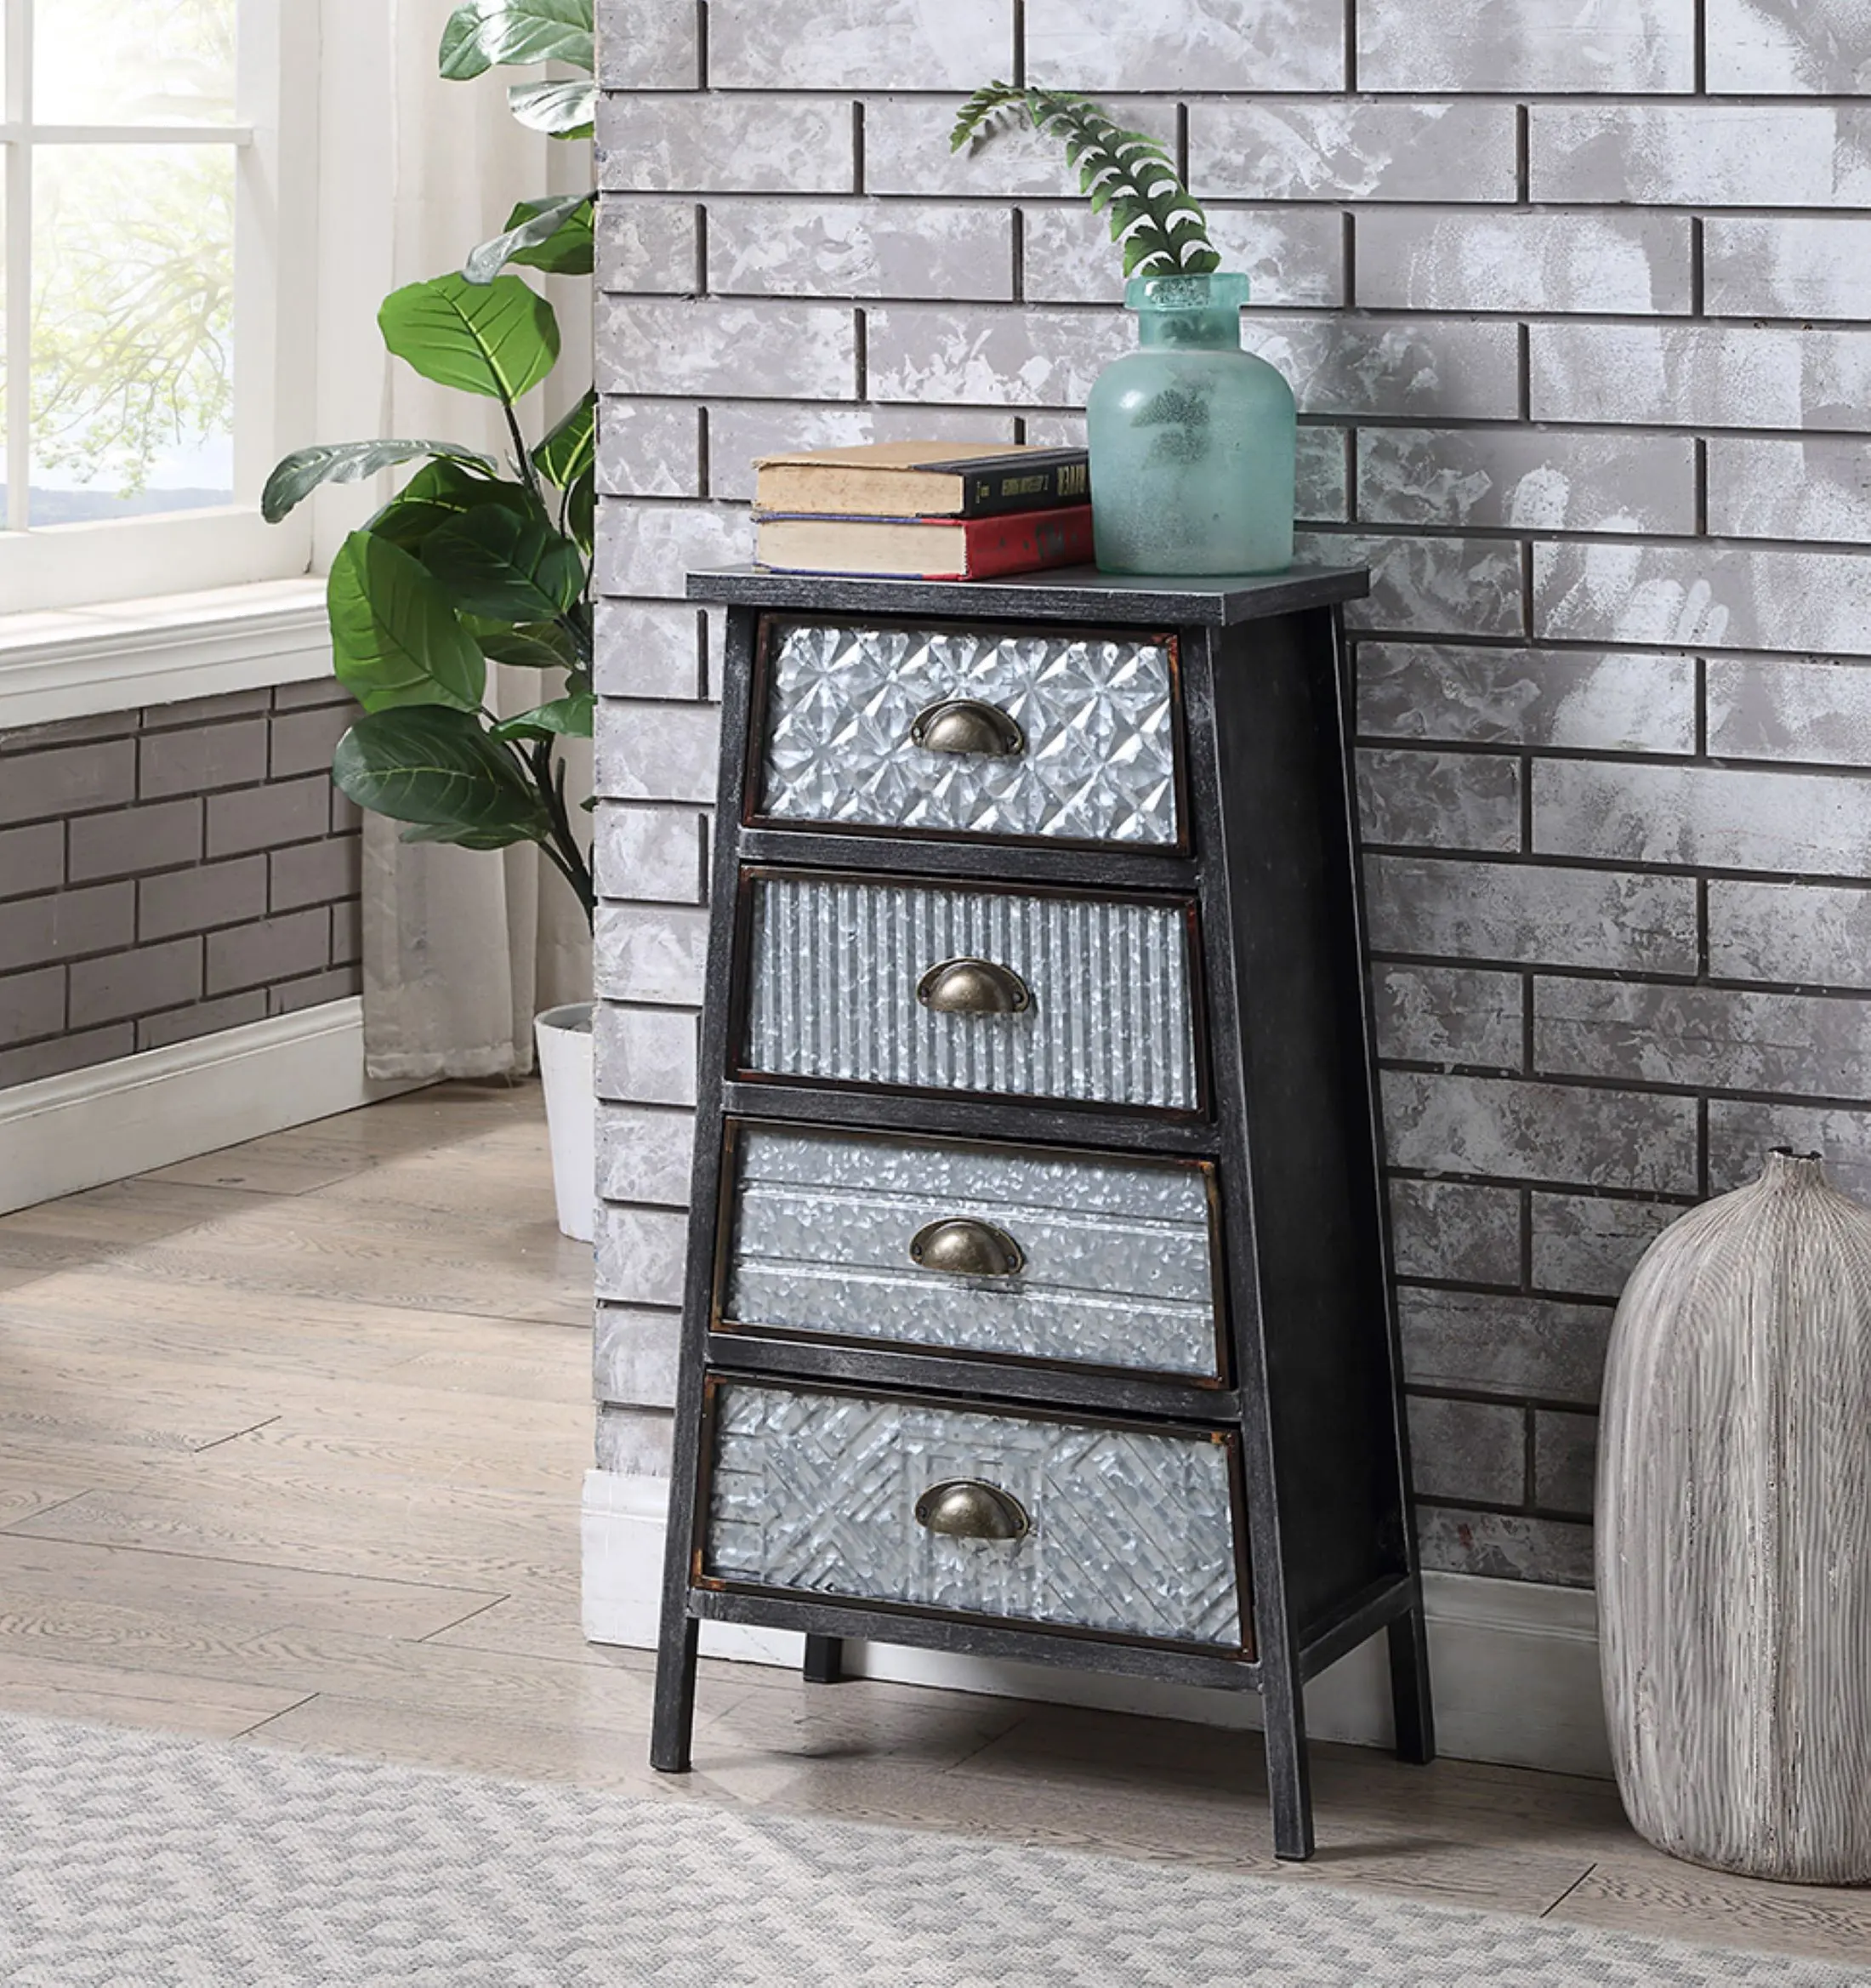 Photos - Dresser / Chests of Drawers 4D Concepts Multi Textured Metal Gray and Galvanized 4 Drawer Chest - Arma